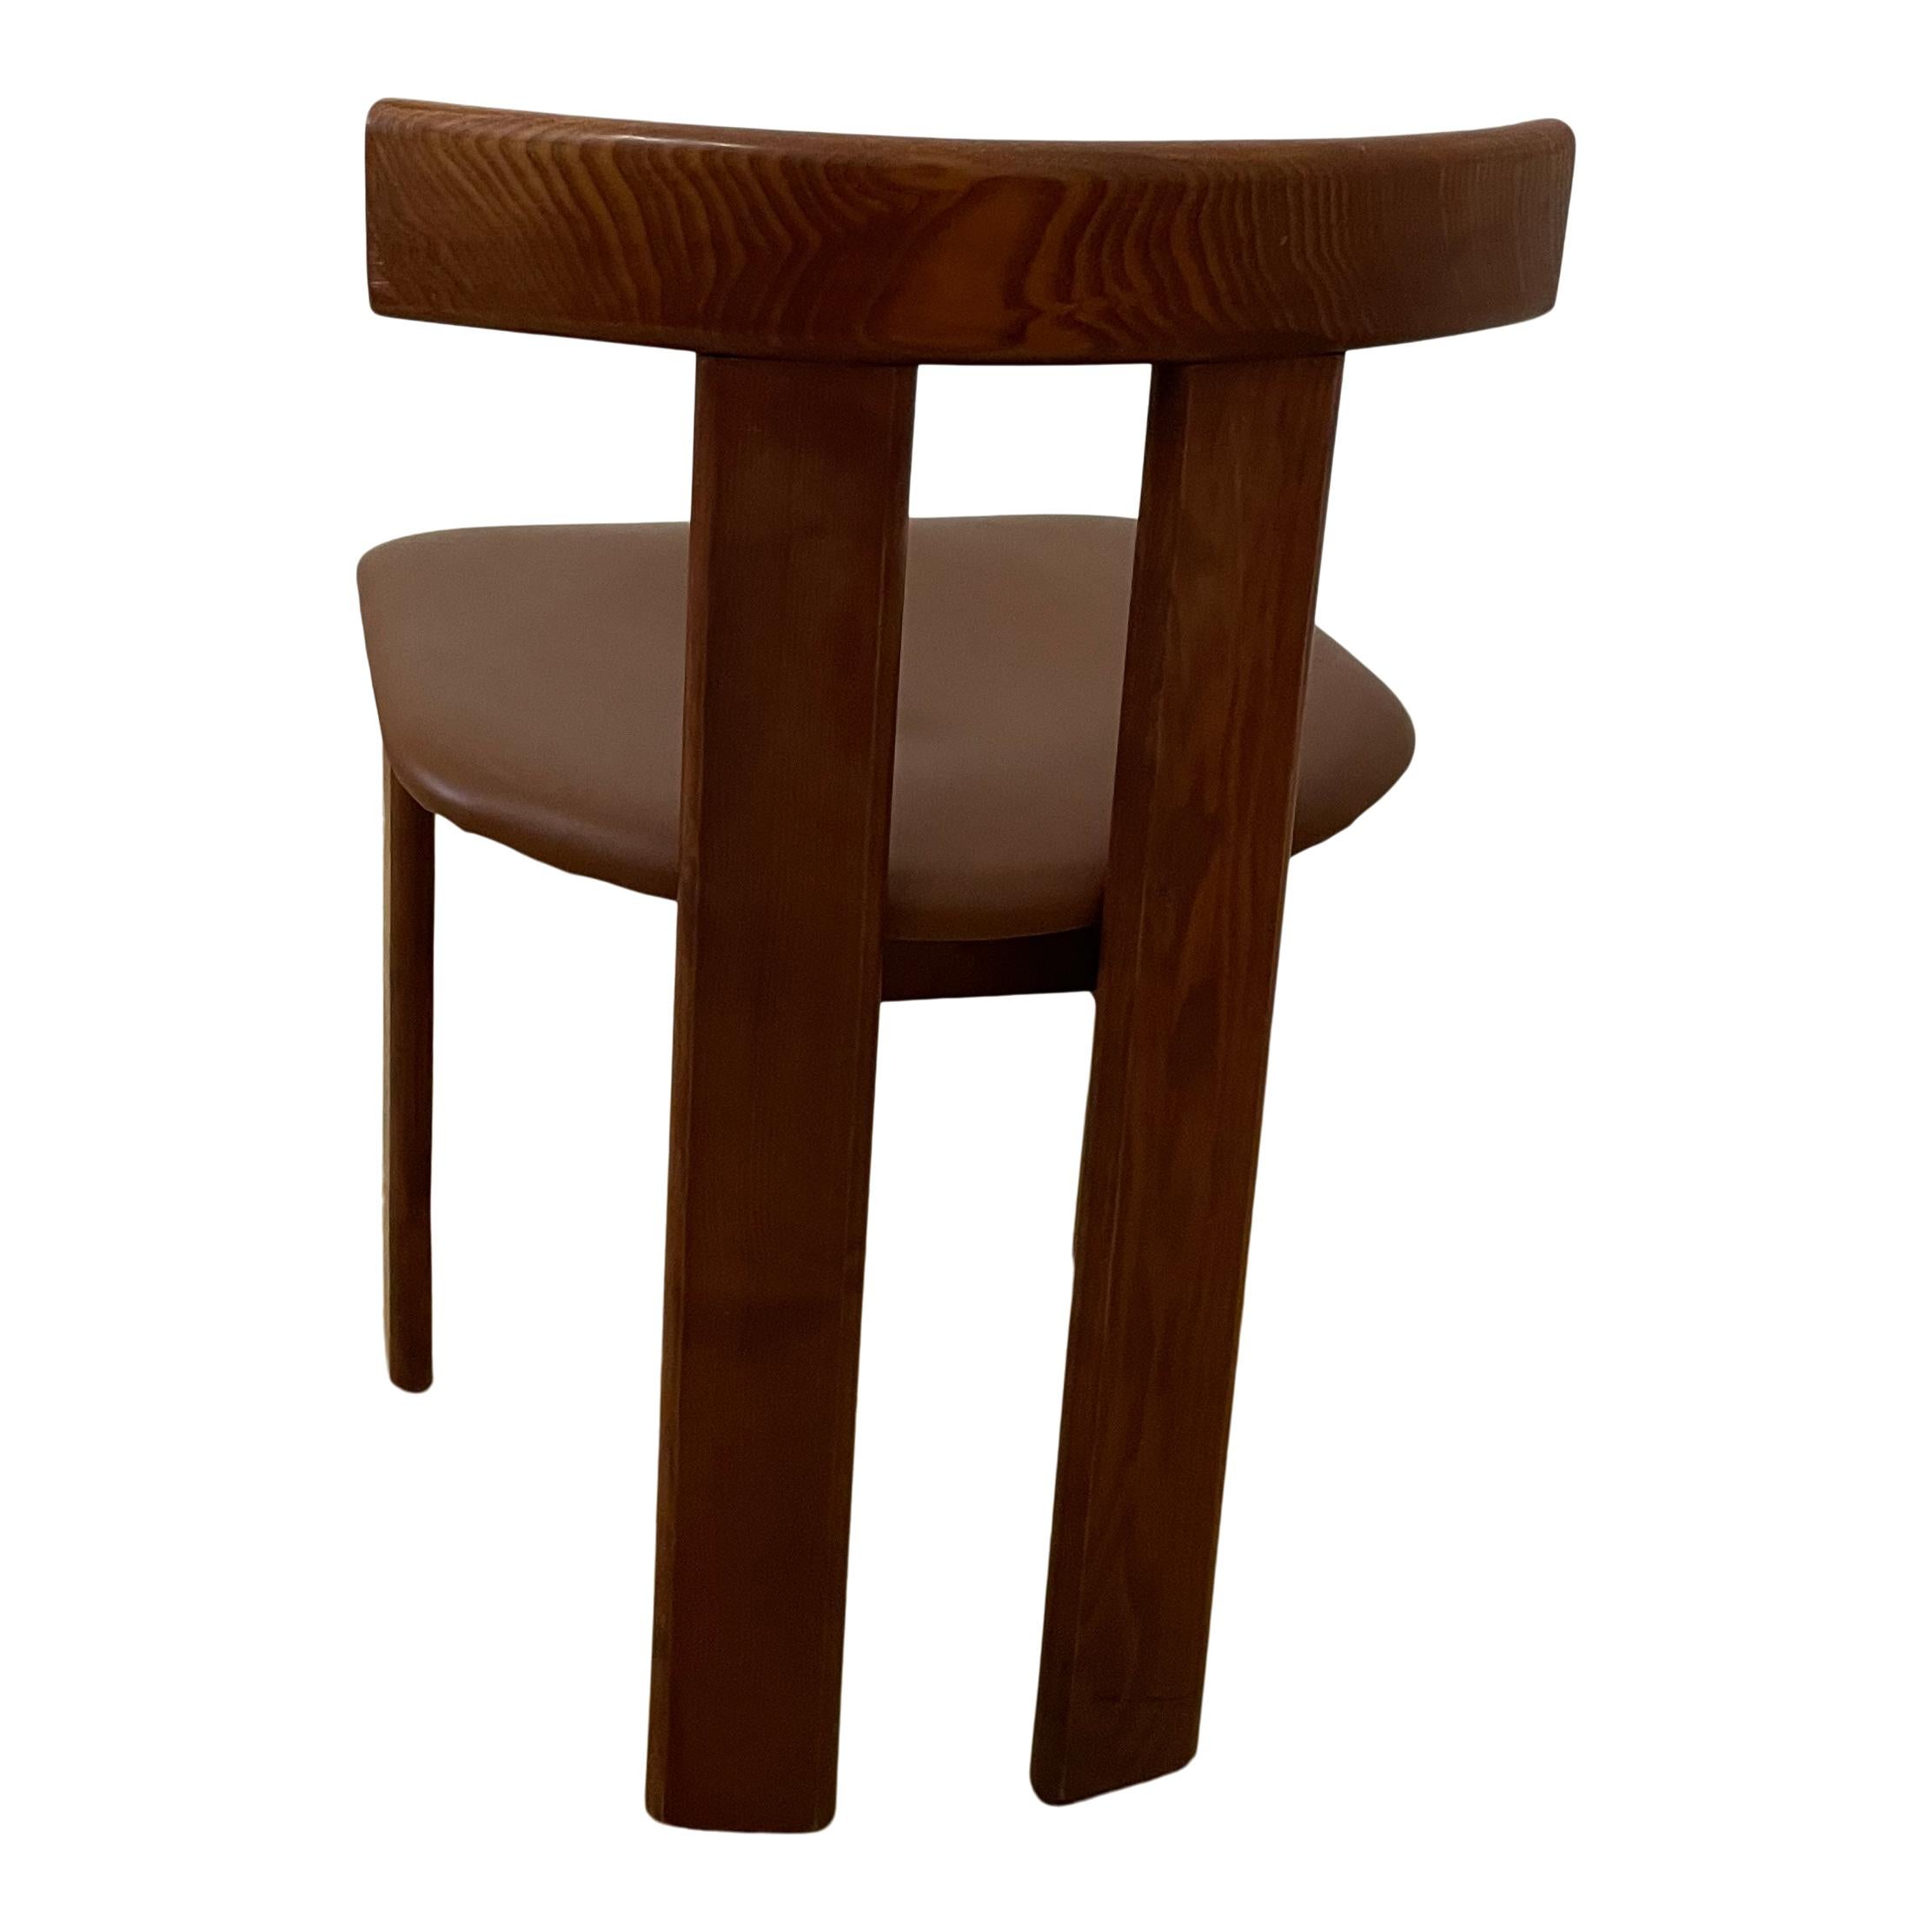 Set of 6 Midcentury Italian Walnut and Leather Dining Chairs, 1970s For Sale 3